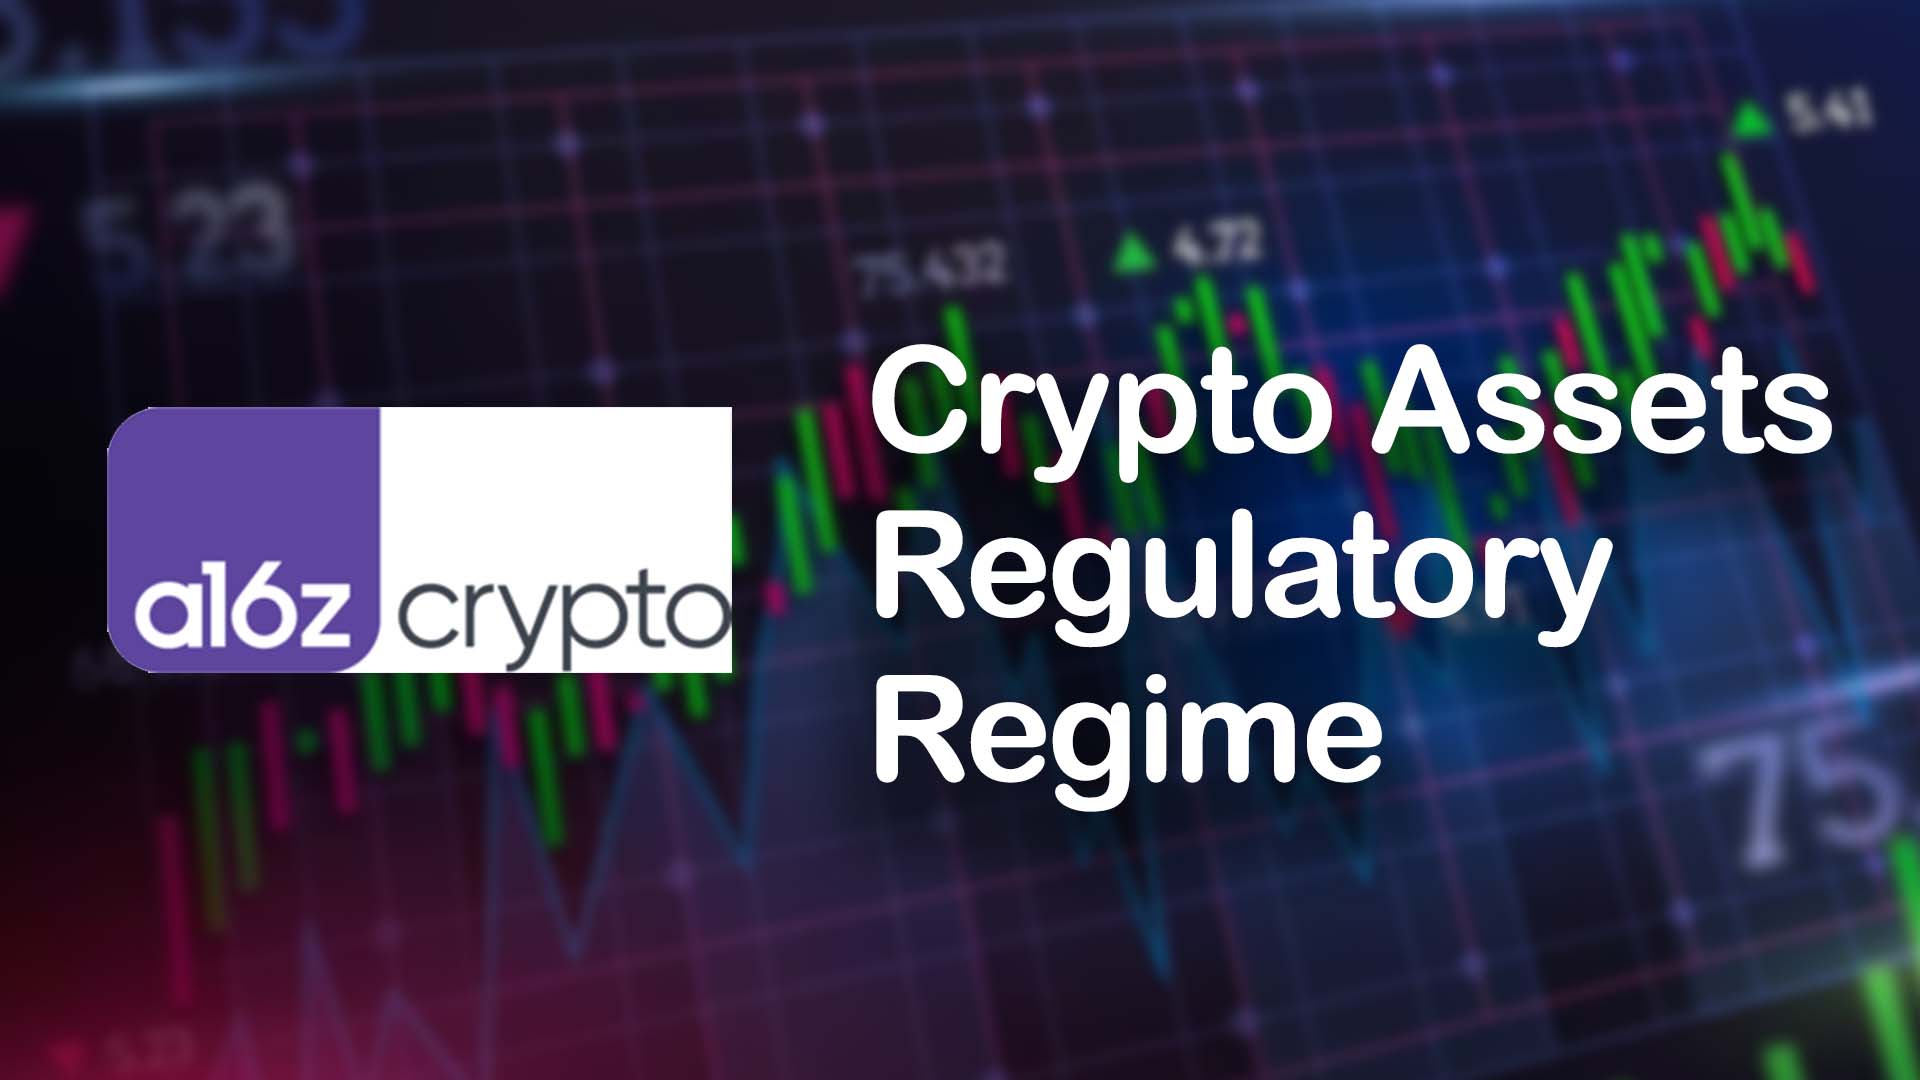 A16z Crypto Shows Support For UK’s Crypto Asset Regulatory Regime